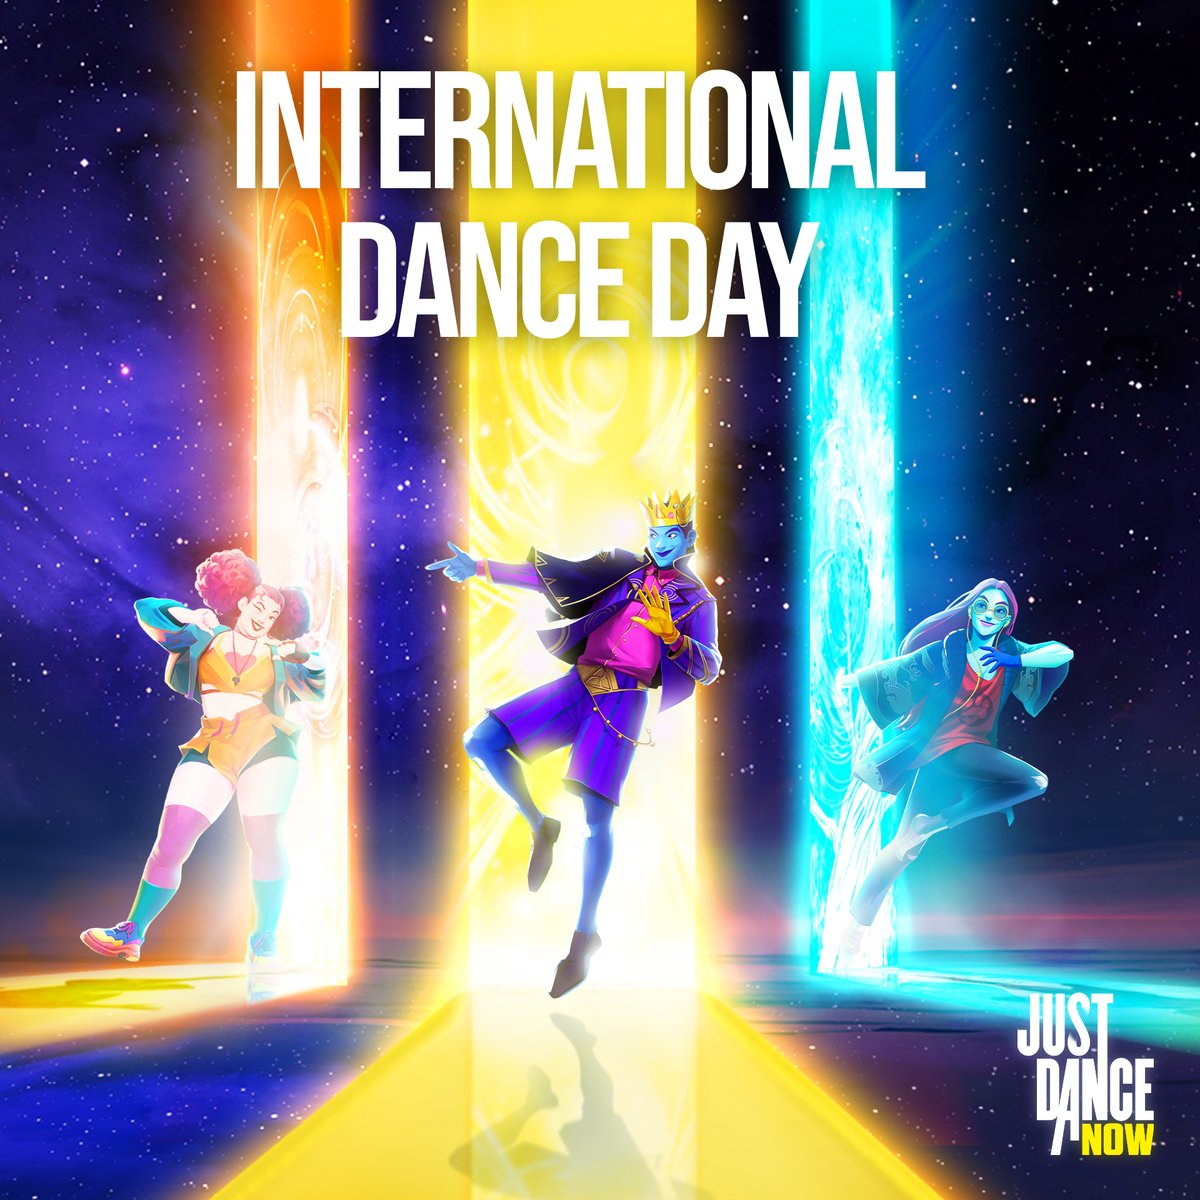 Show off your best moves this International Dance Day! Download Just Dance Now on your smartphone here: justdancenow.com